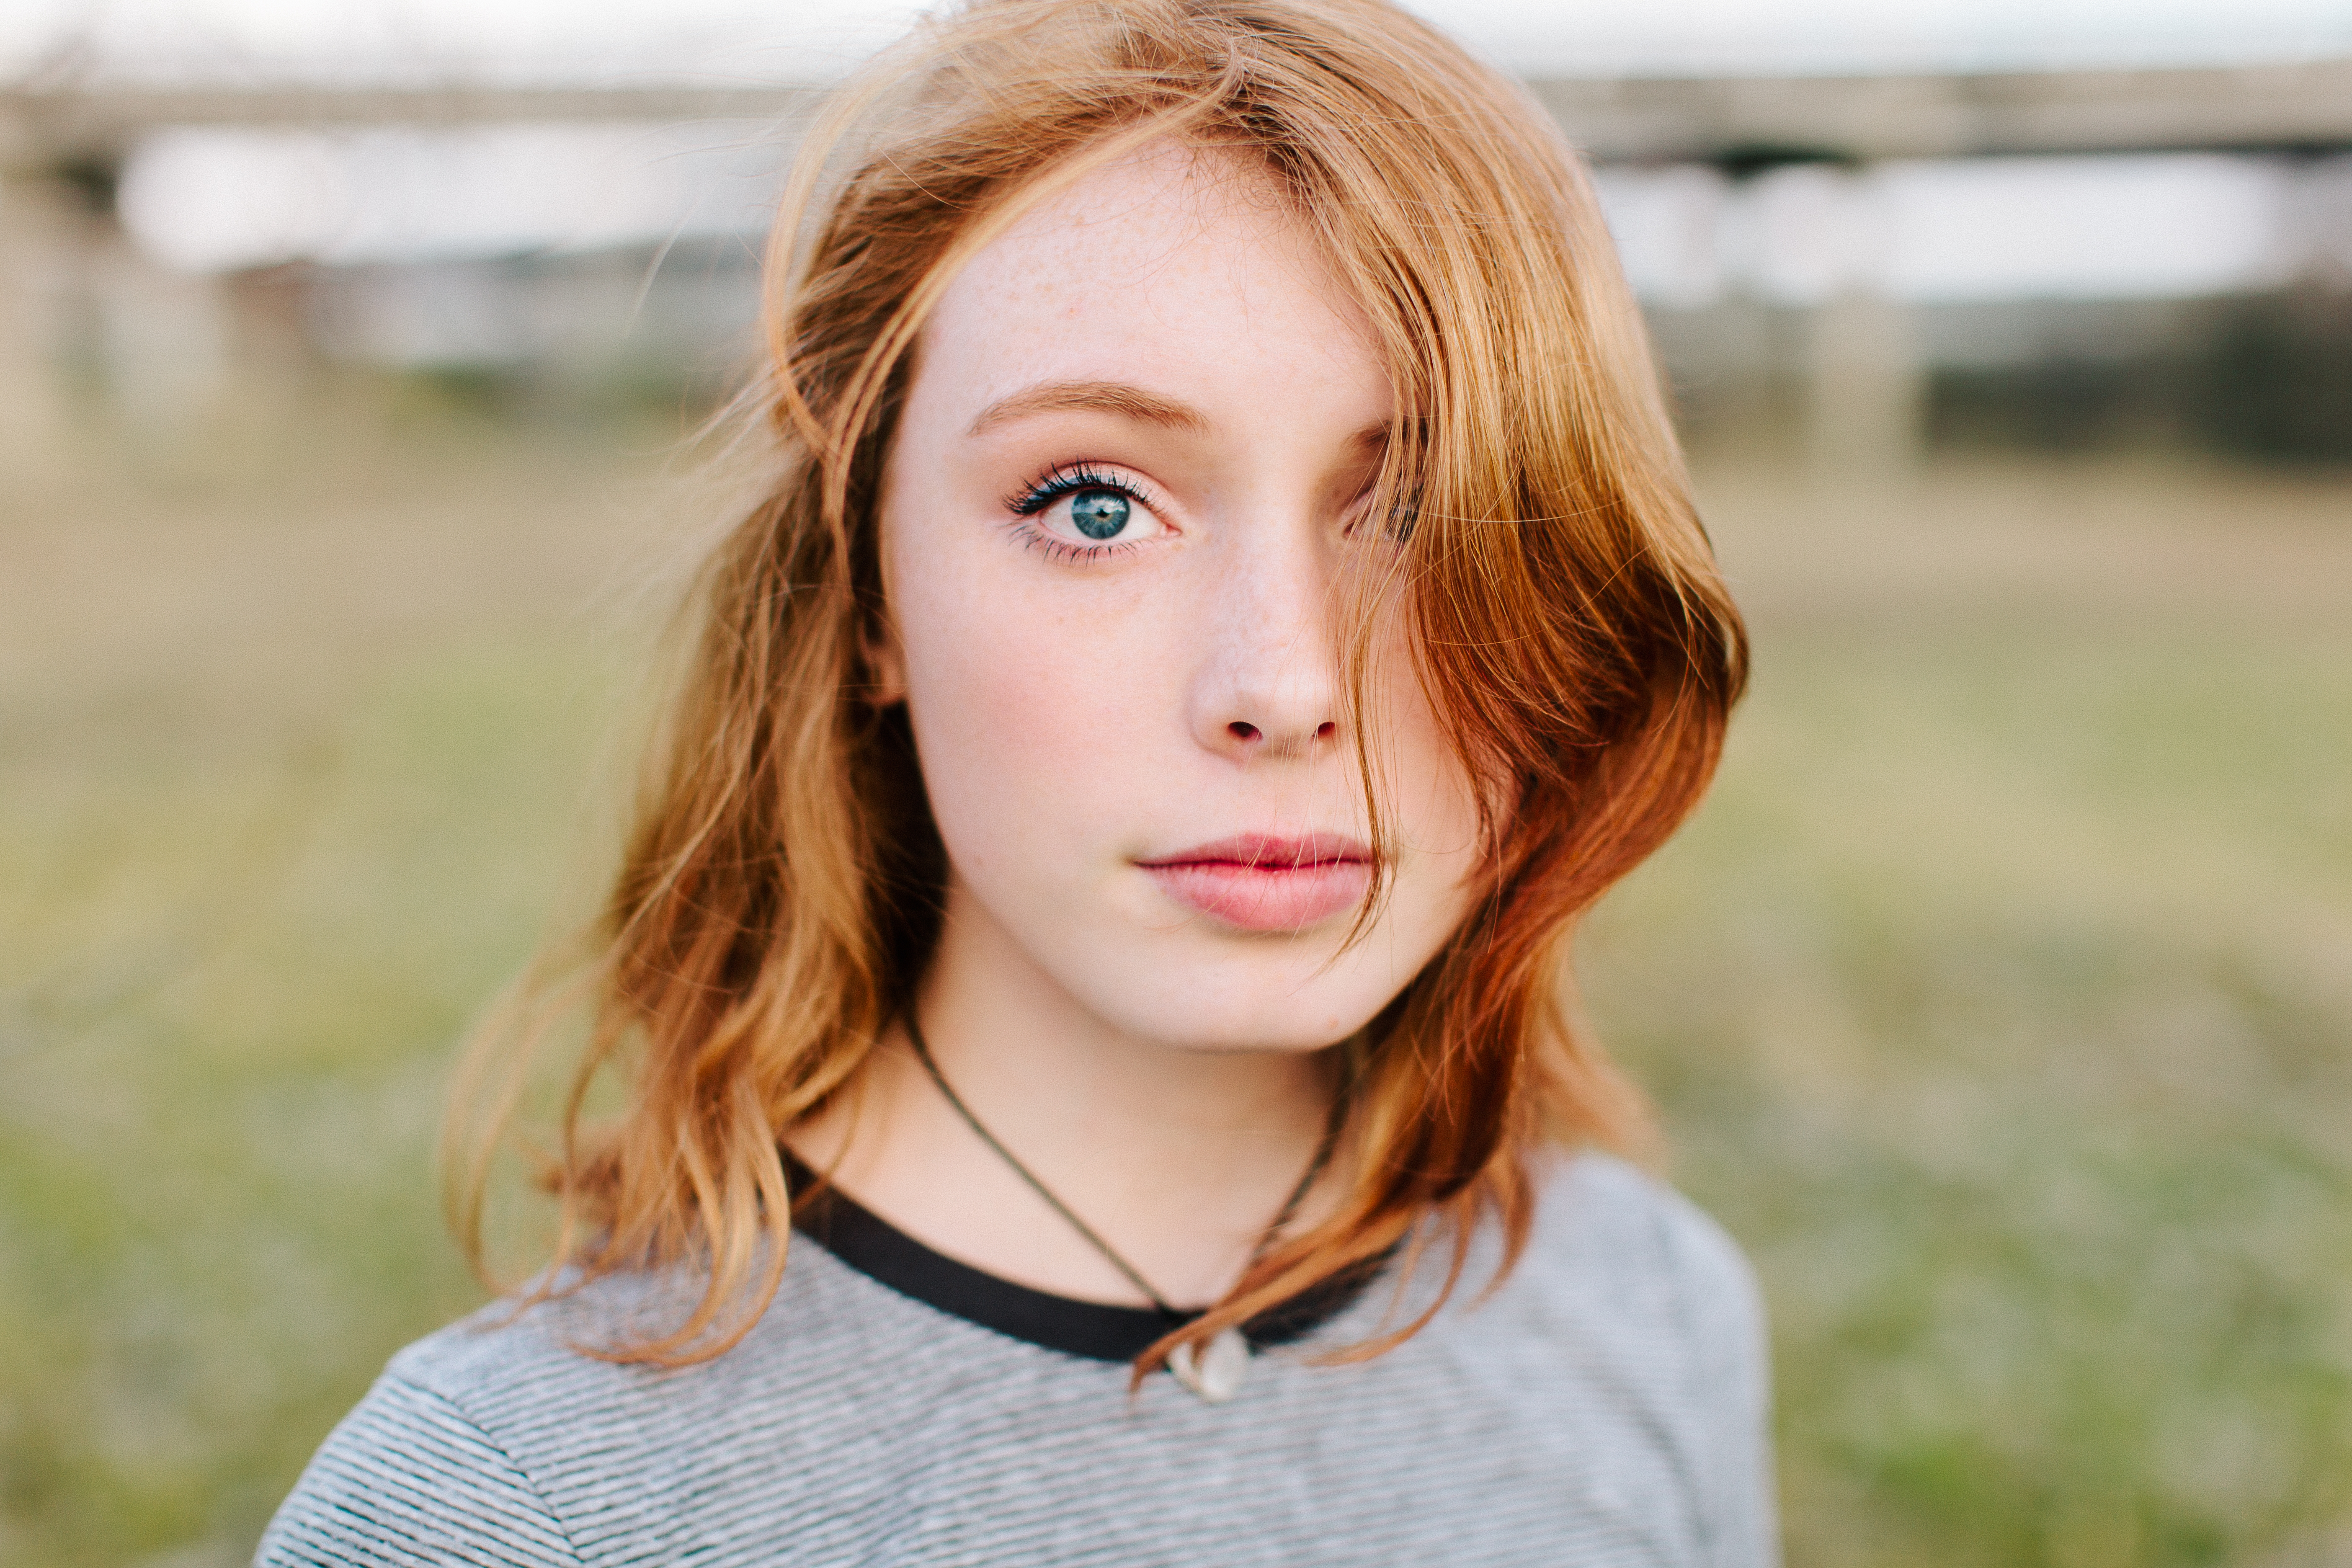 Vibrant red-haired teen girl in a gray t-shirt.